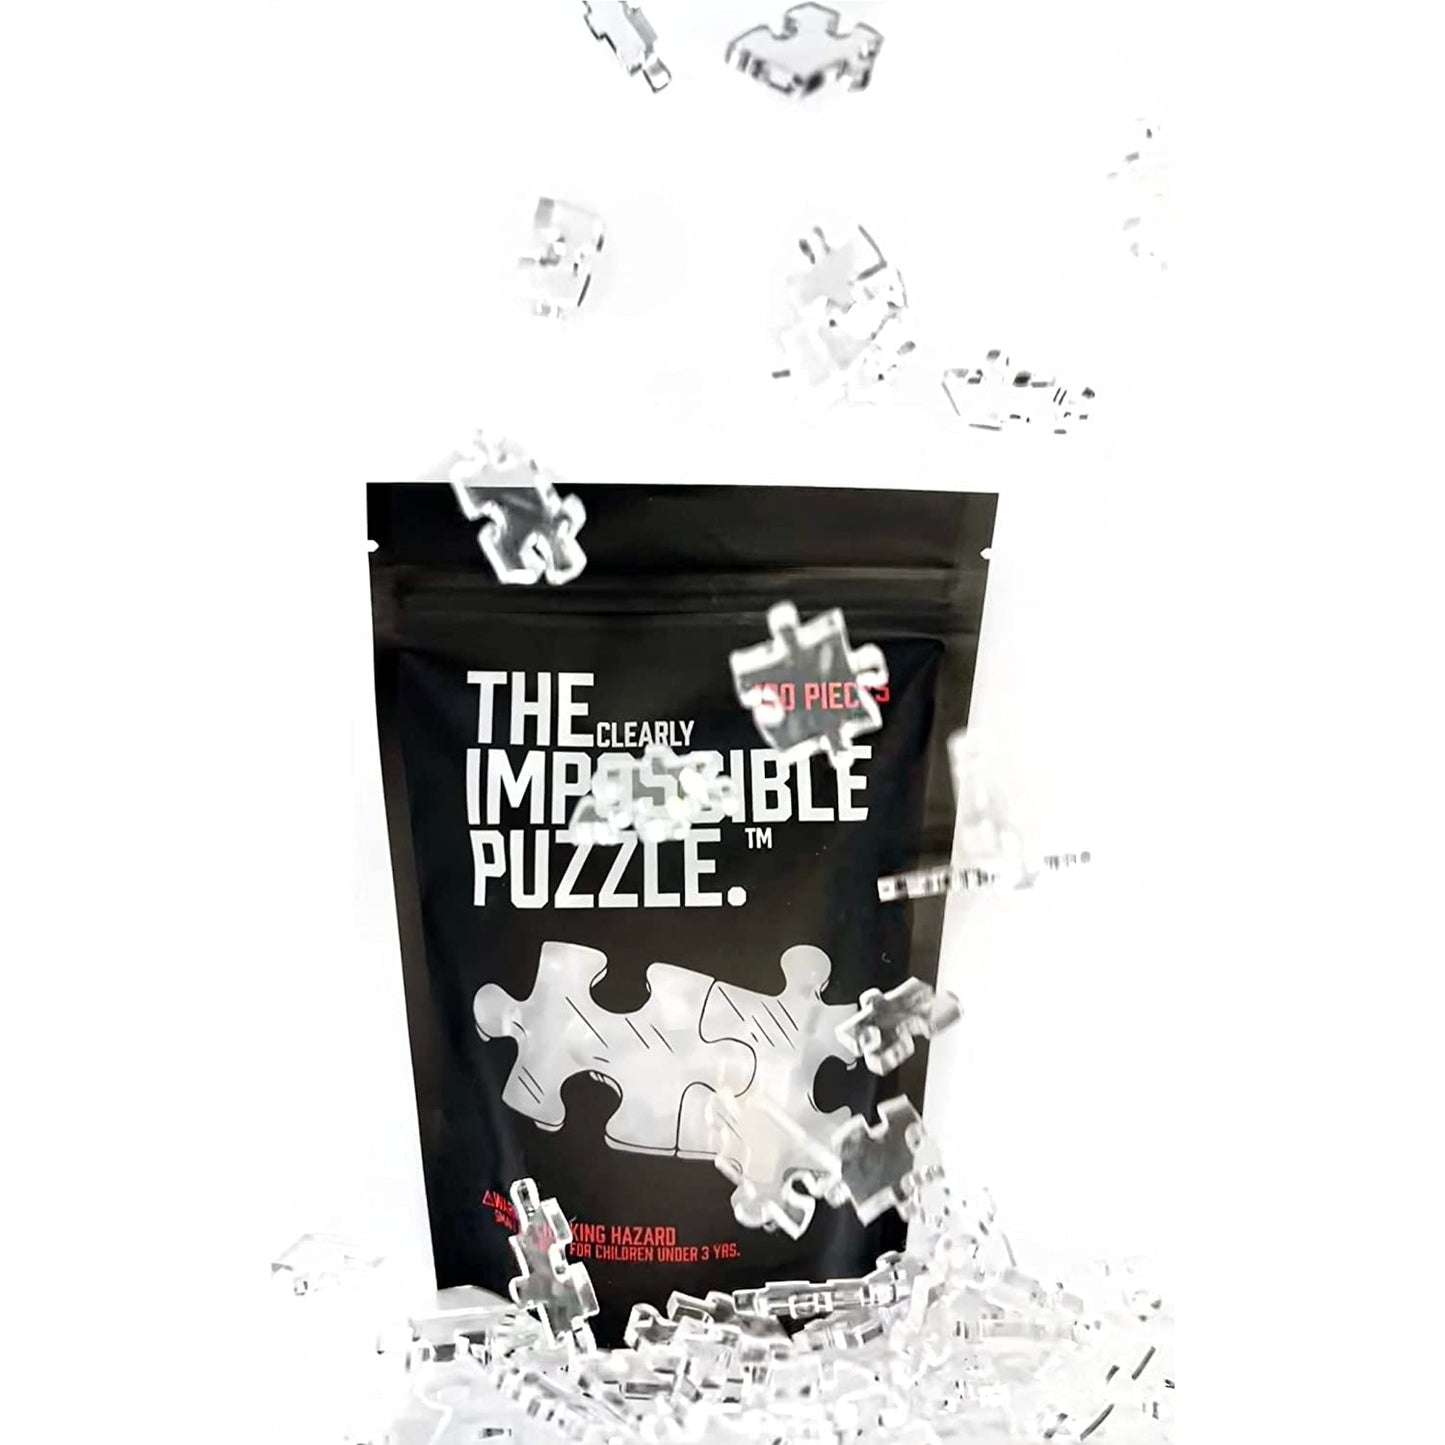 Various pieces of a clear jigsaw puzzle are falling from above in front of the packaging for The Clearly Impossible Puzzle.